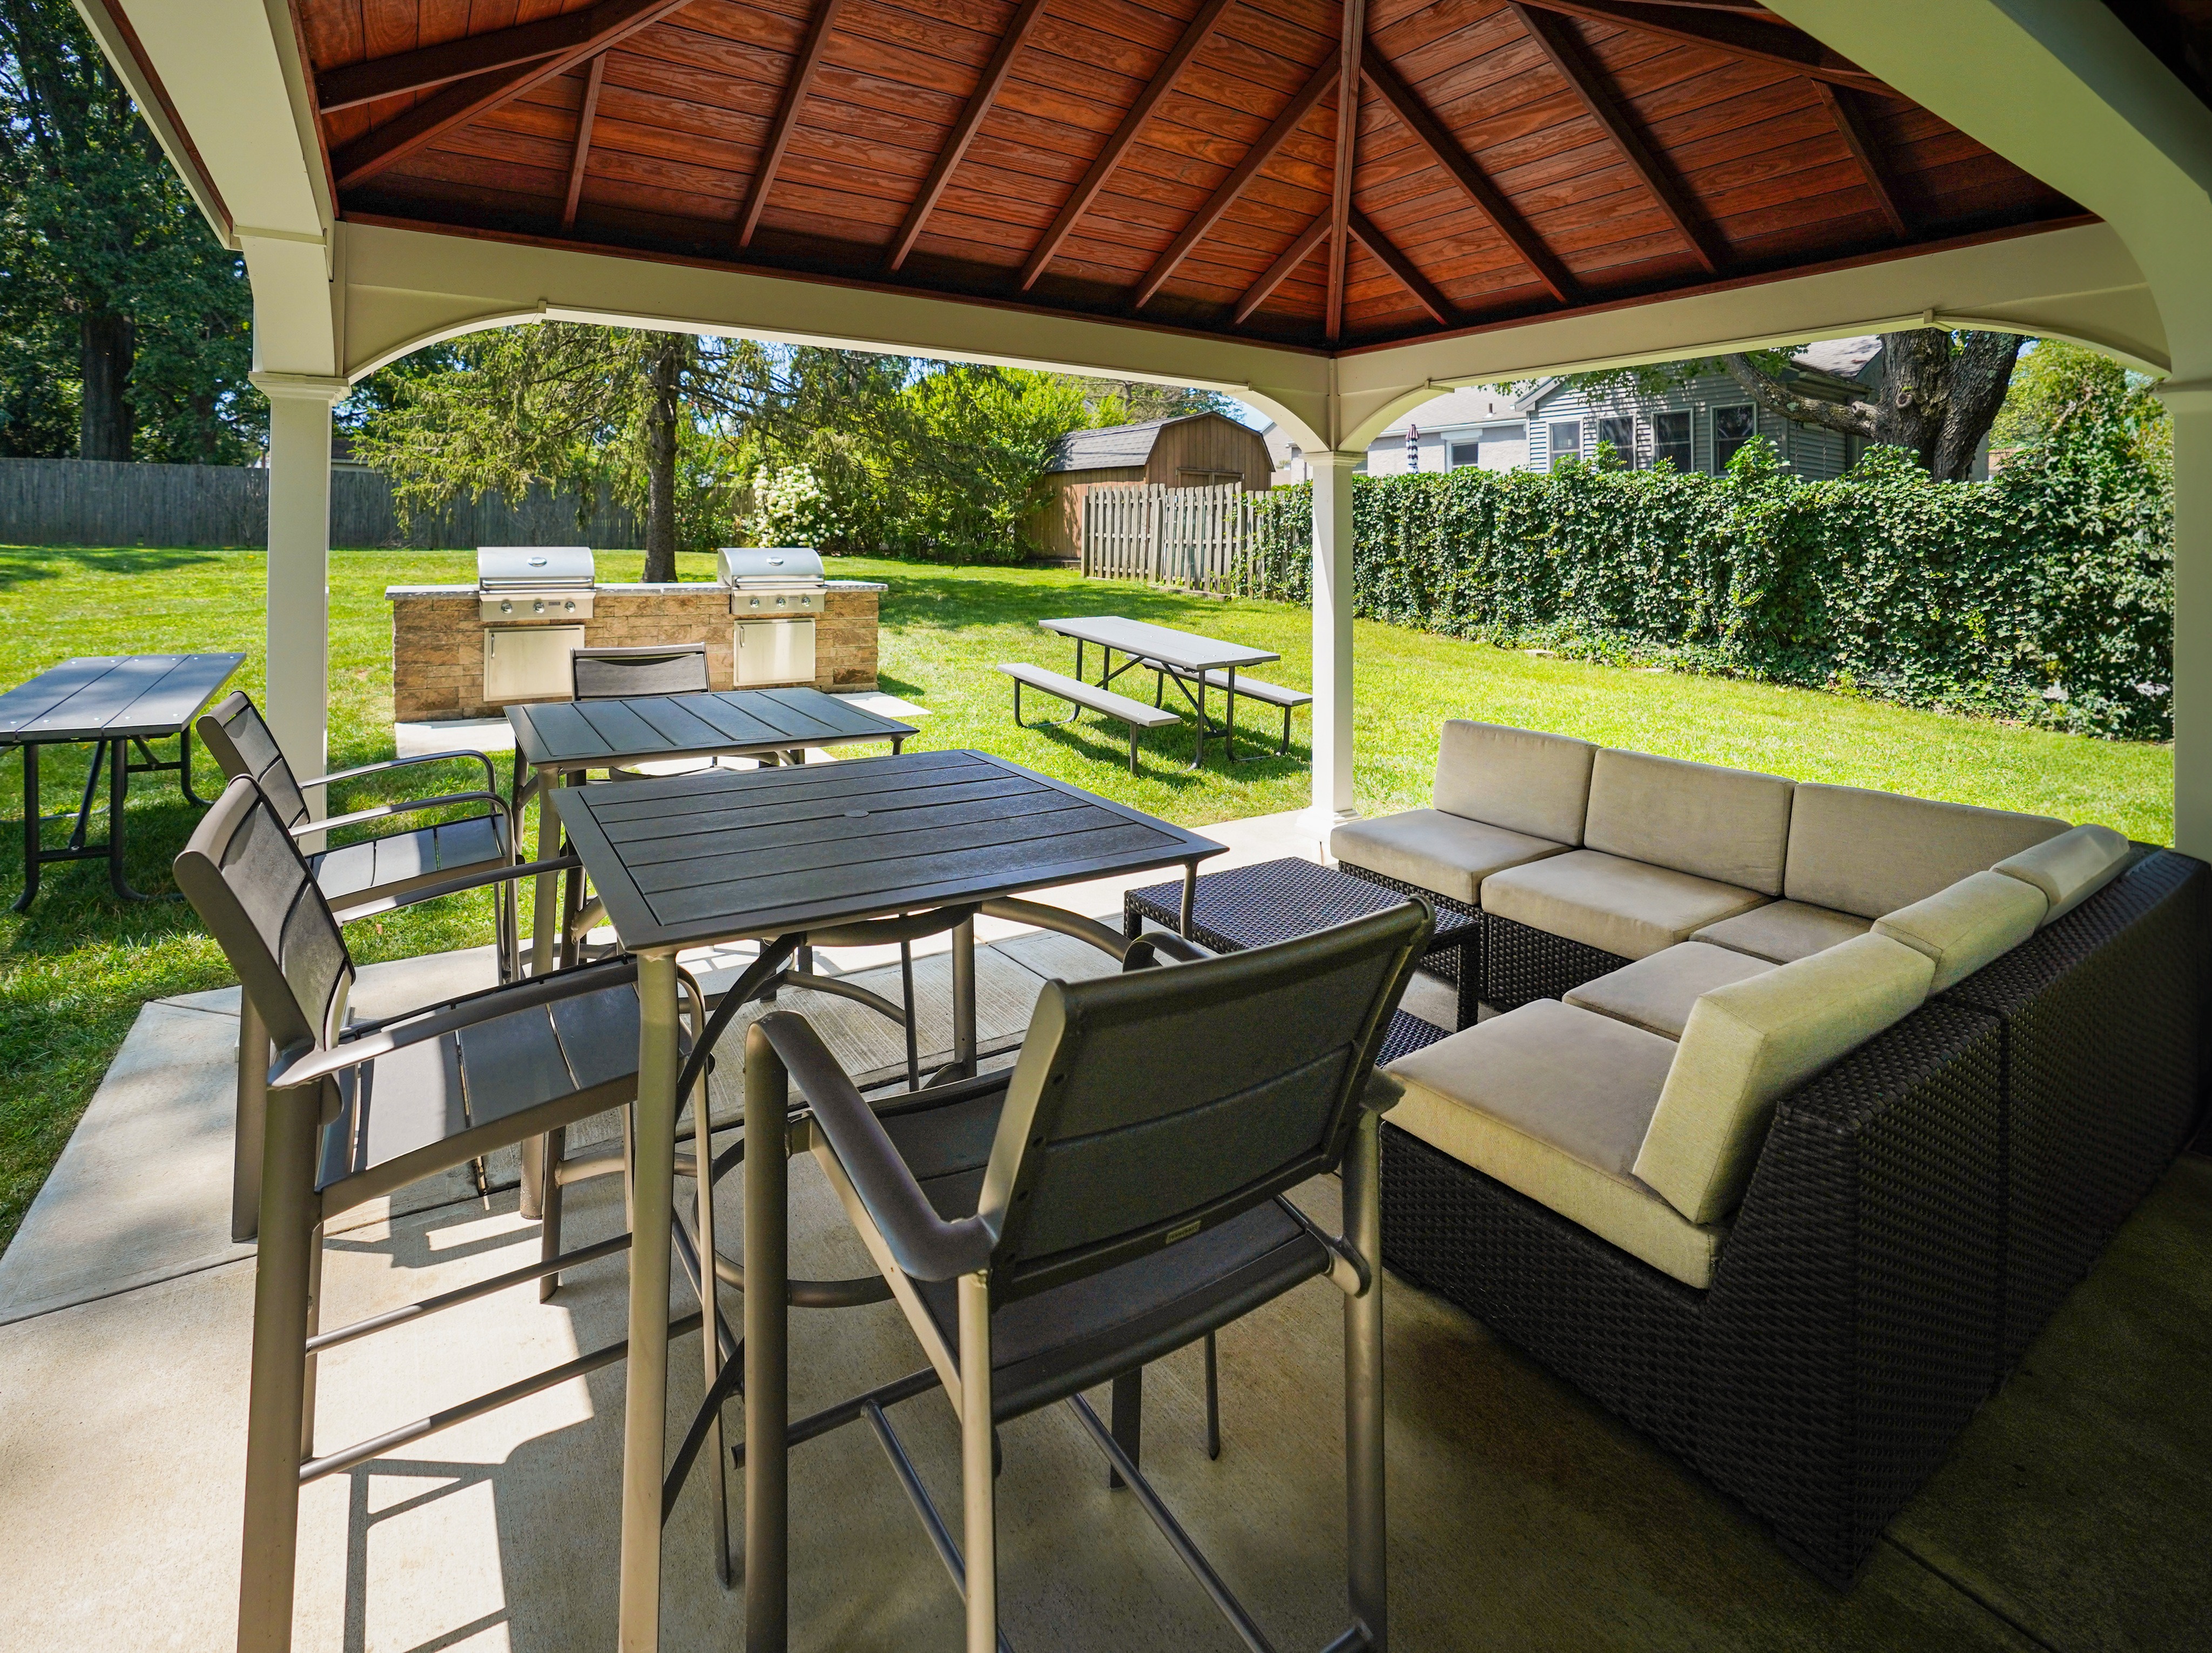 Apartments For Rent In West Chester - The Grilling Area Has Two BBQ Stations, Benches, Couches, Tables, Gazebo, And Is Surrounded By Maintained Lush Grass.